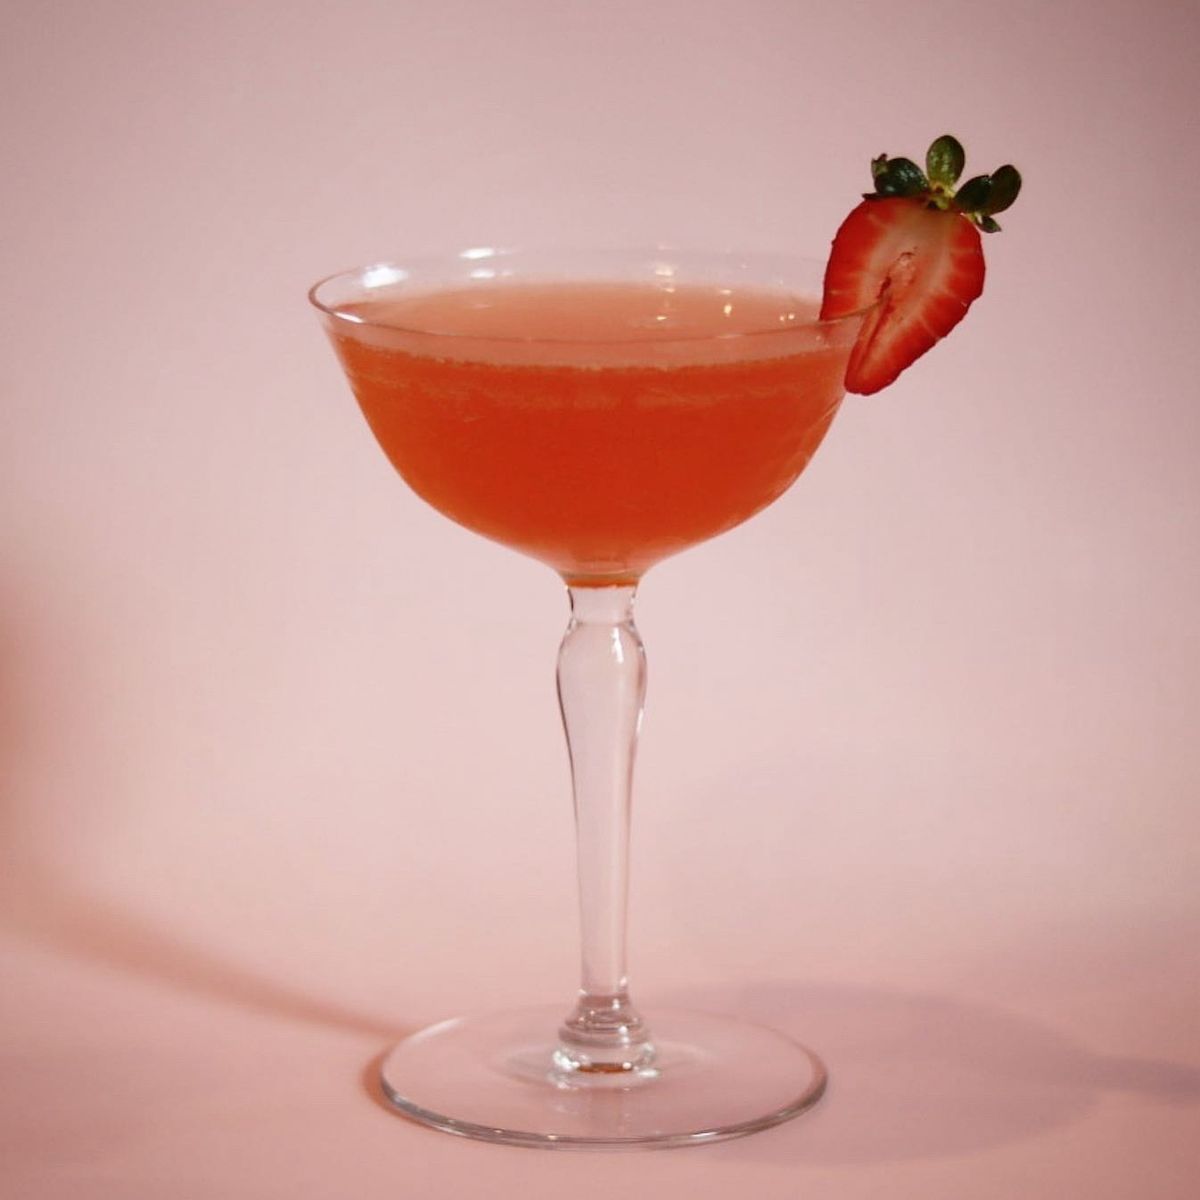 I know it’s technically fall but it’s been so warm lately I’ve been craving lighter and brighter drinks. Bourbon and strawberries are so good together, adding in vanilla takes it next level y’all! It’s a simple sipper best enjoyed on the patio. Cheers!